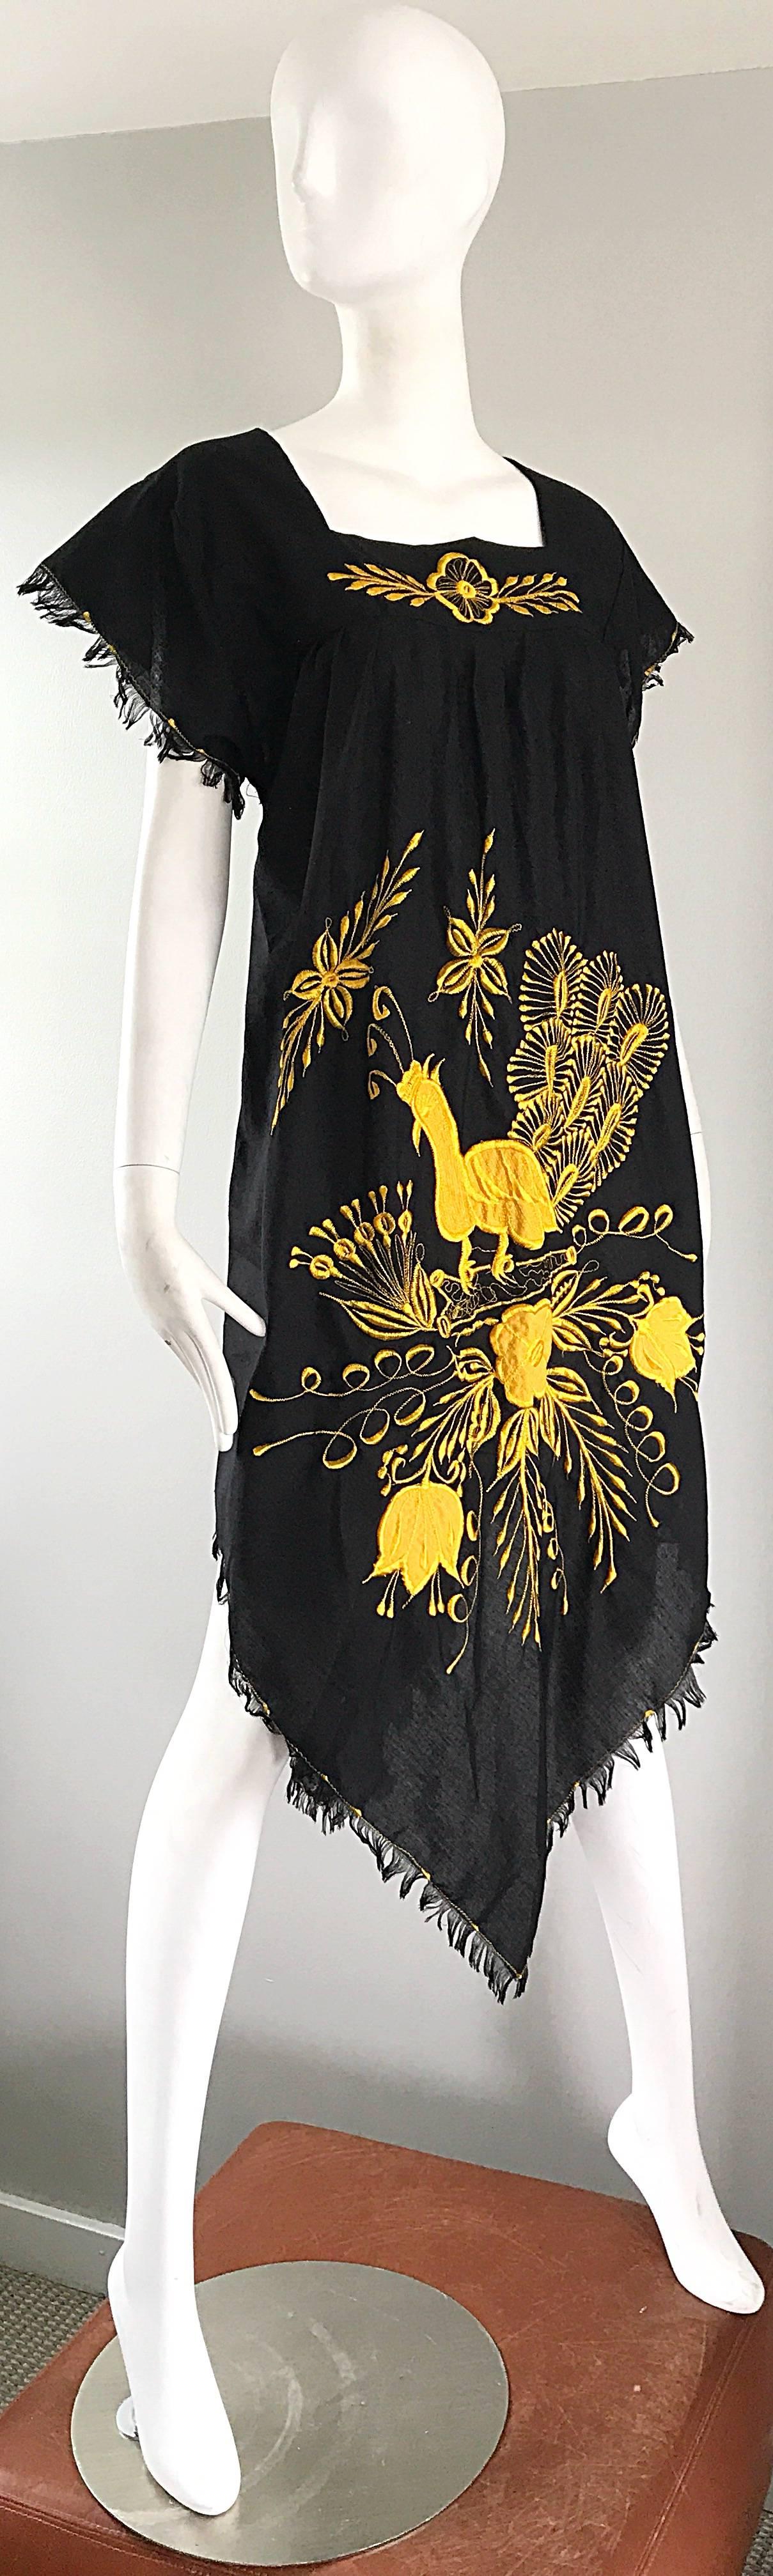 1970s Black and Yellow Handkerchief Scarf Hem Mexican Embrodiered Caftan Dress 2